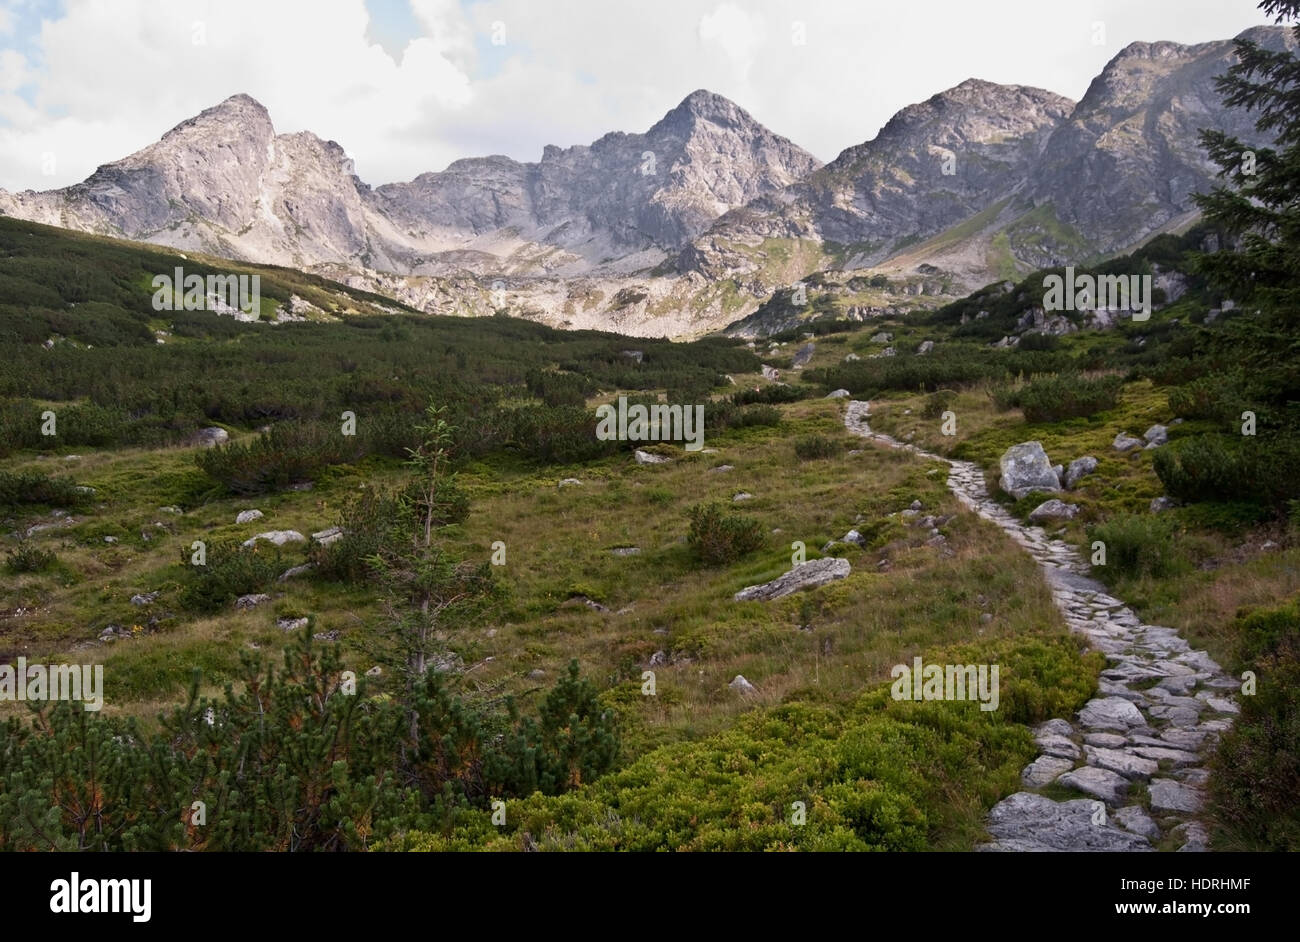 Dolina Zielona Gasienicowa mountain valley with stone hiking trail, grass and peaks in polish part of High Tatras mountains Stock Photo